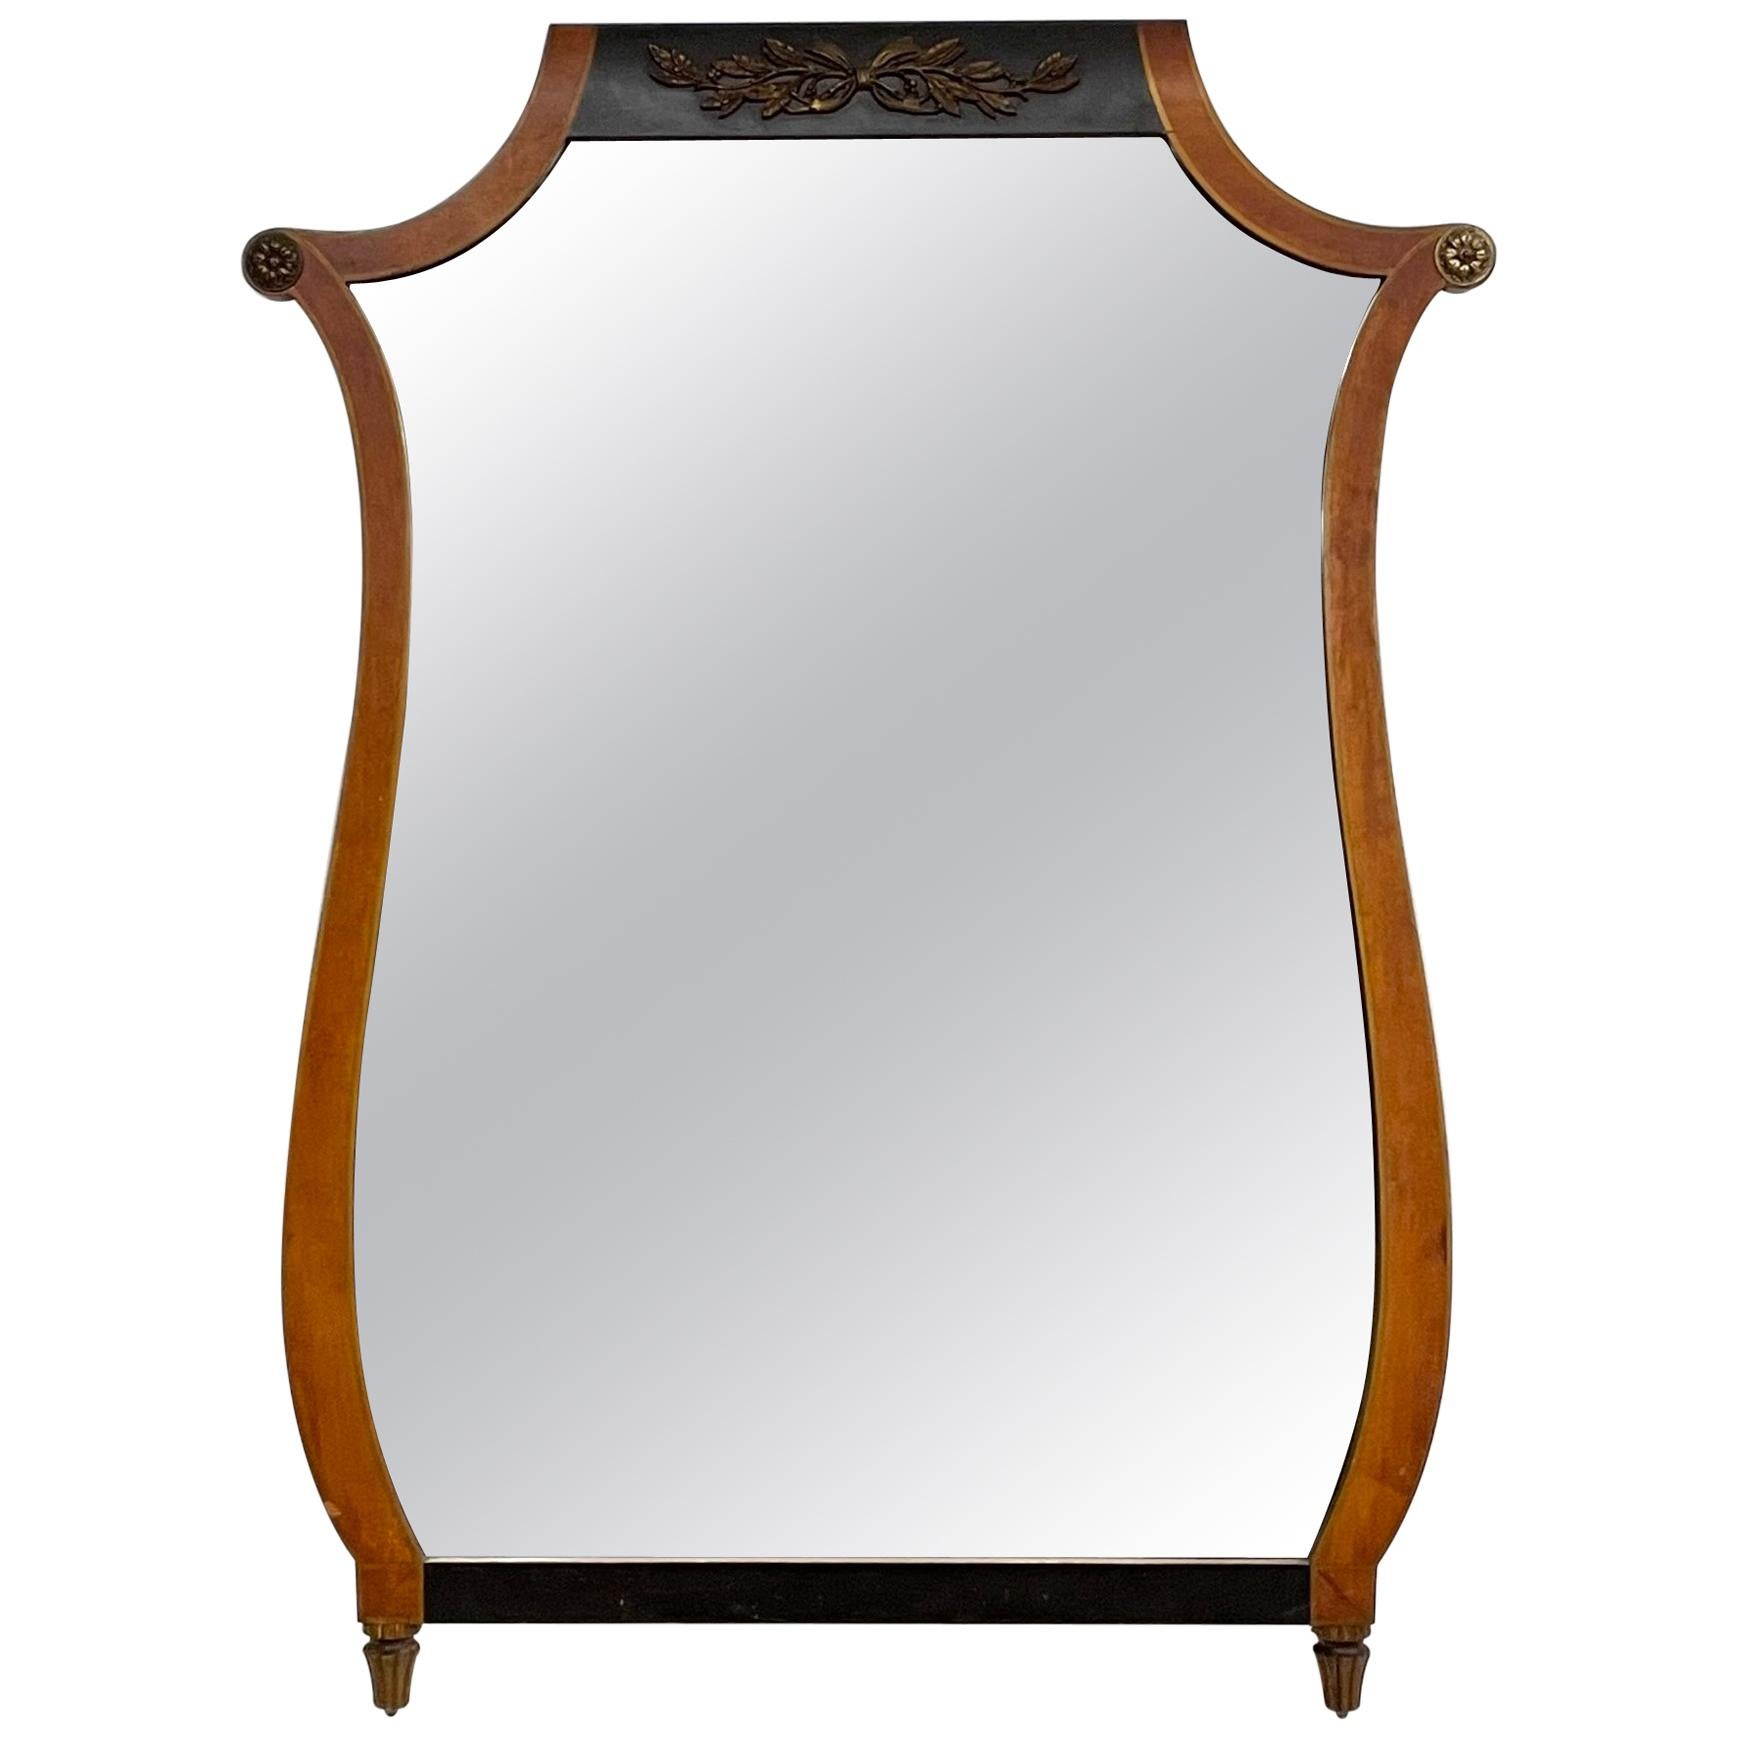 1940s American Neoclassical Wall Mirror by Landstrom Furniture